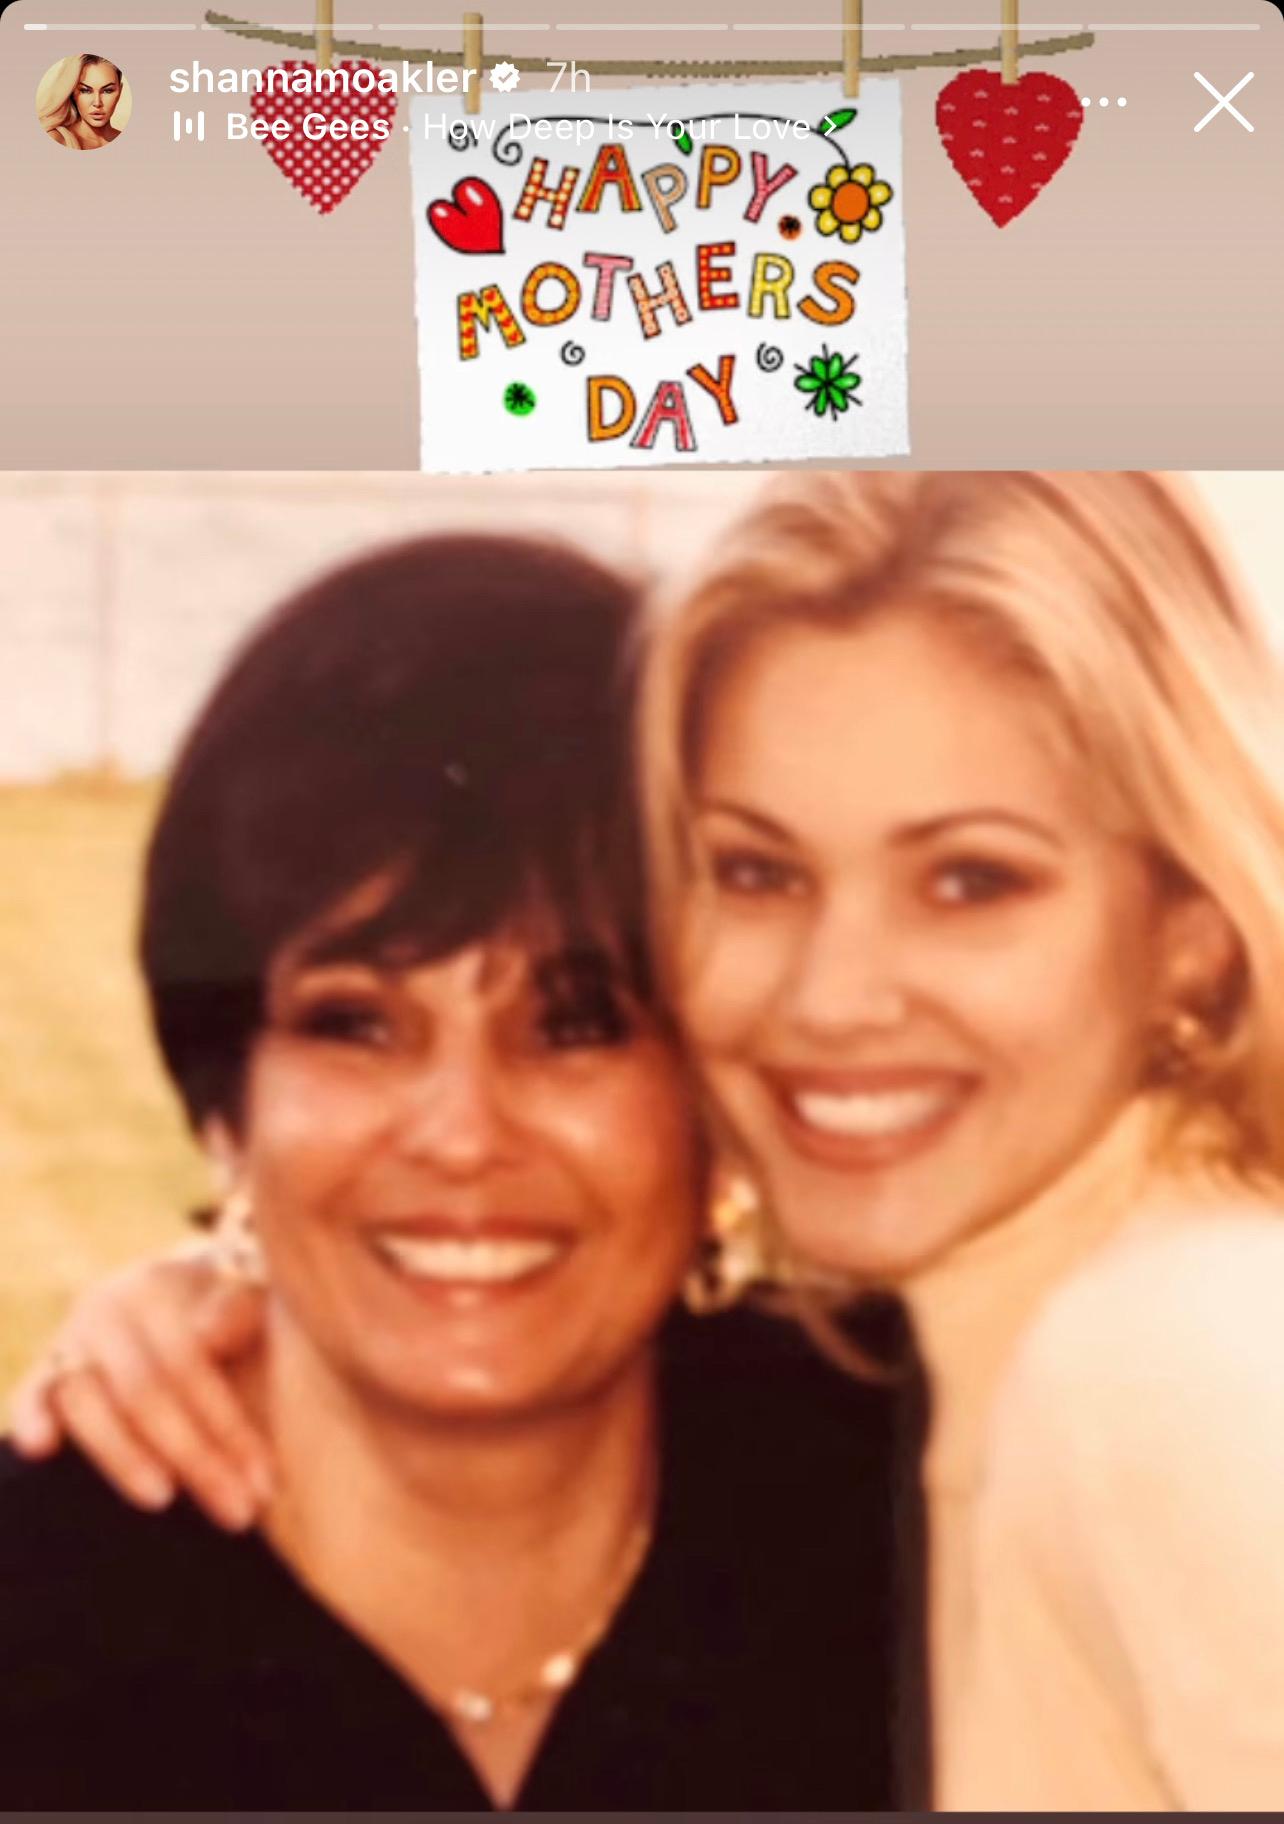 Shanna Moakler Remembers Late Mom In Mother's Day Celebration